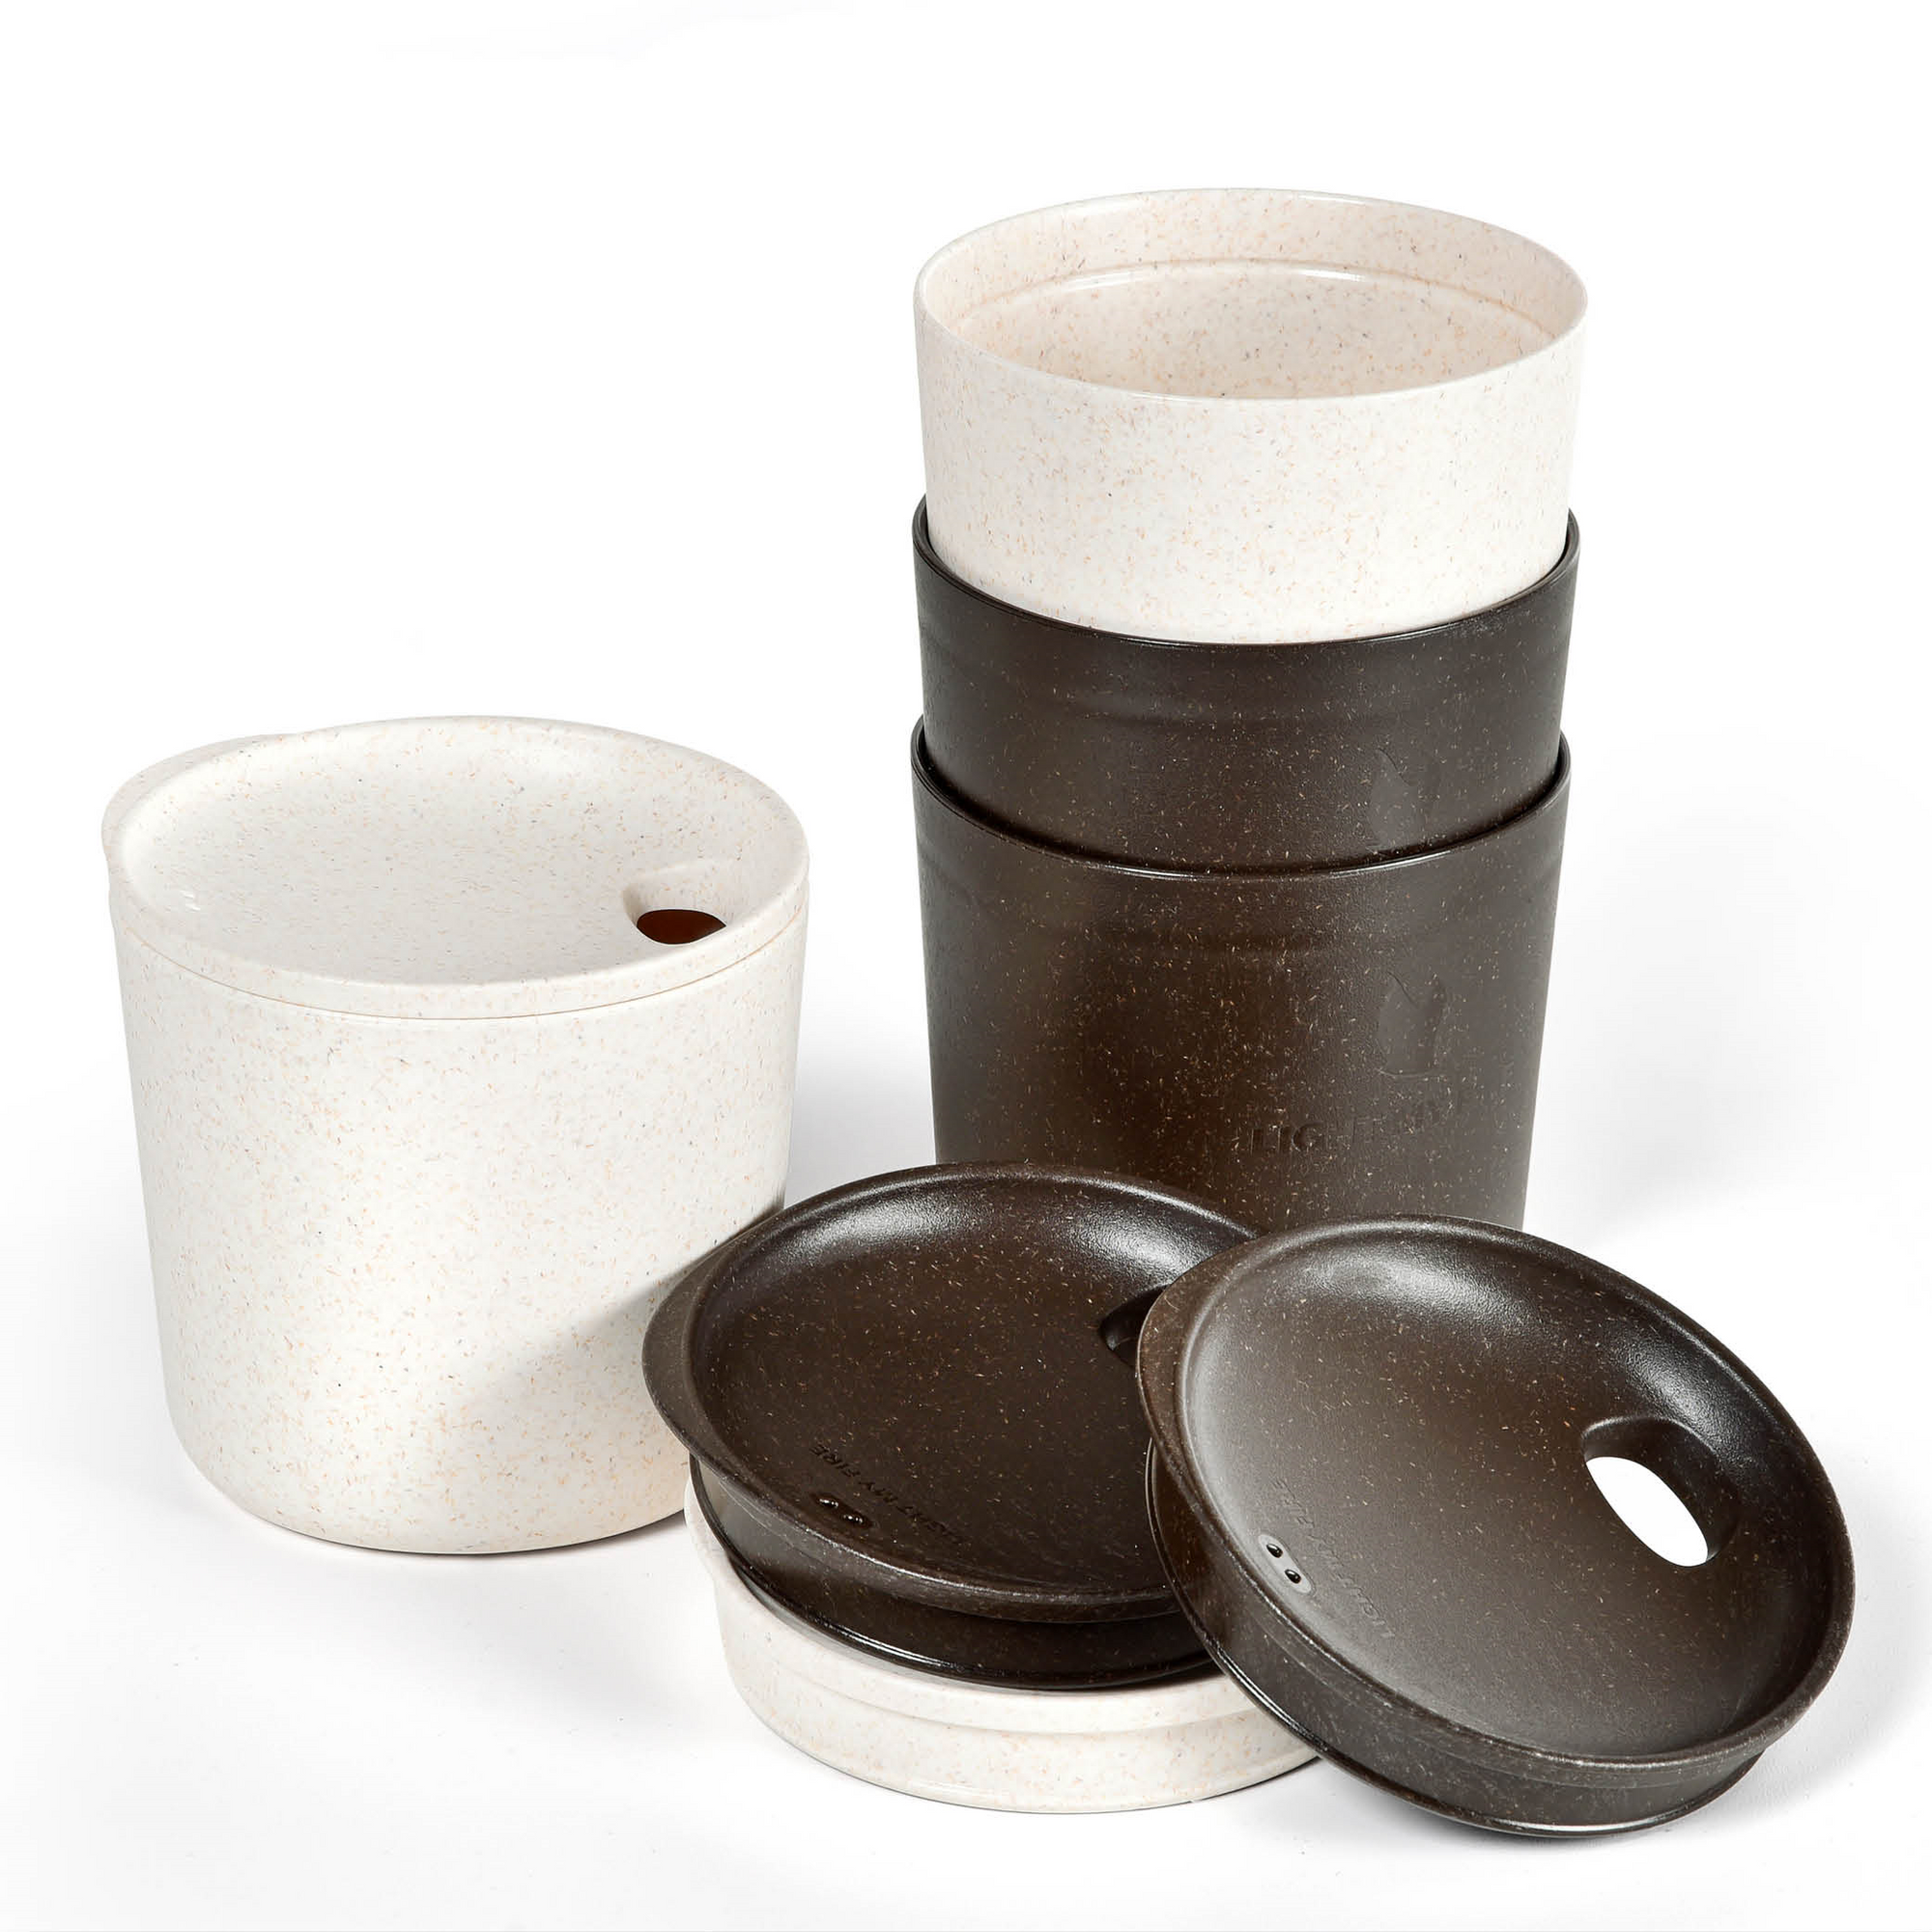 MYCUP N LID SHORT 4 PACK - COCOA / CREAM